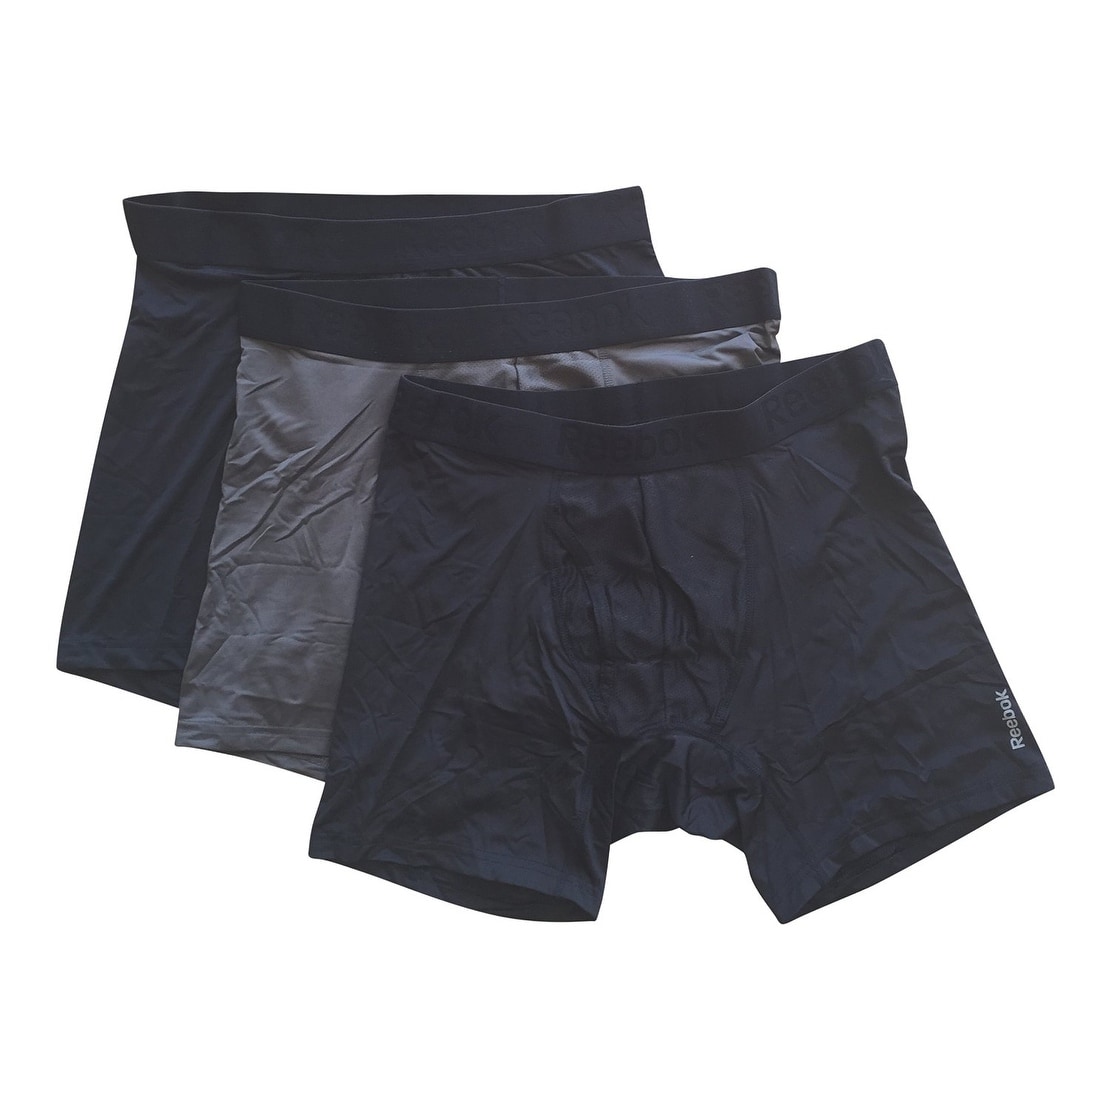 reebok boxer briefs with fly